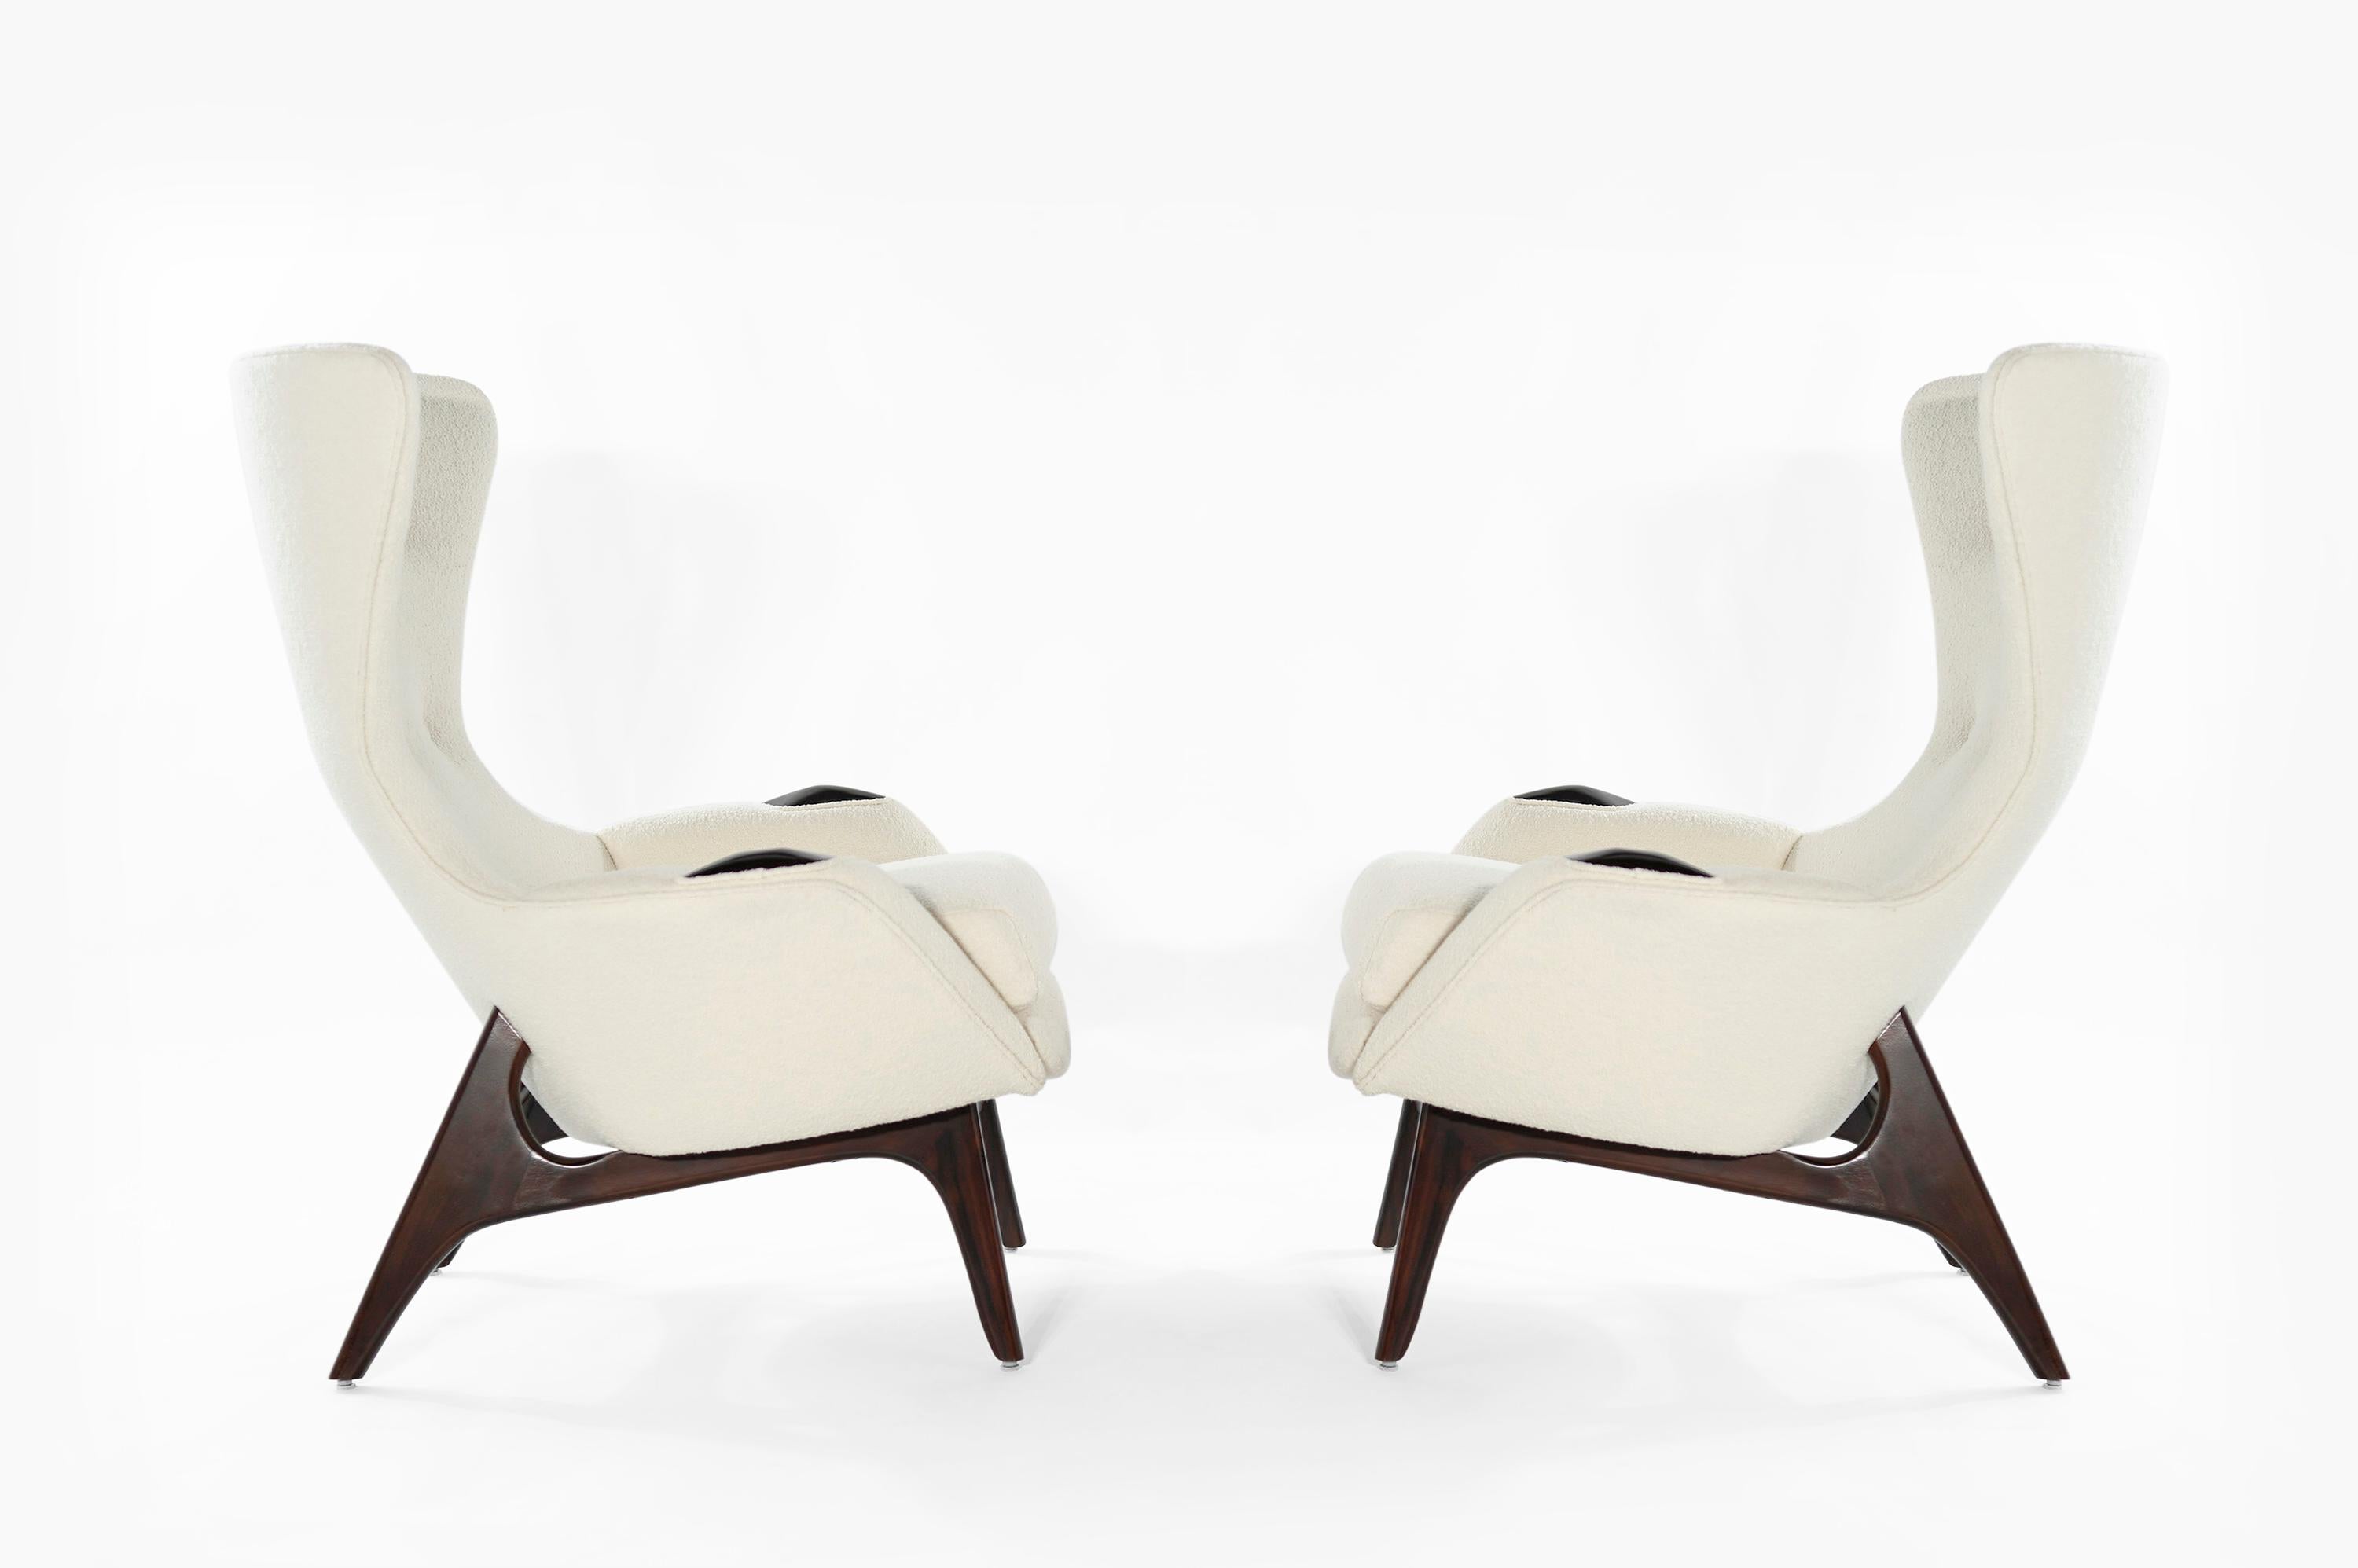 Rarely seen set of lounge chairs designed by Adrian Pearsall for Craft Associates, circa 1950s. Sculptural walnut bases and armrest detail have been redone in espresso finish, complimenting the off-white bouclé perfectly. Priced as a set. Fabric